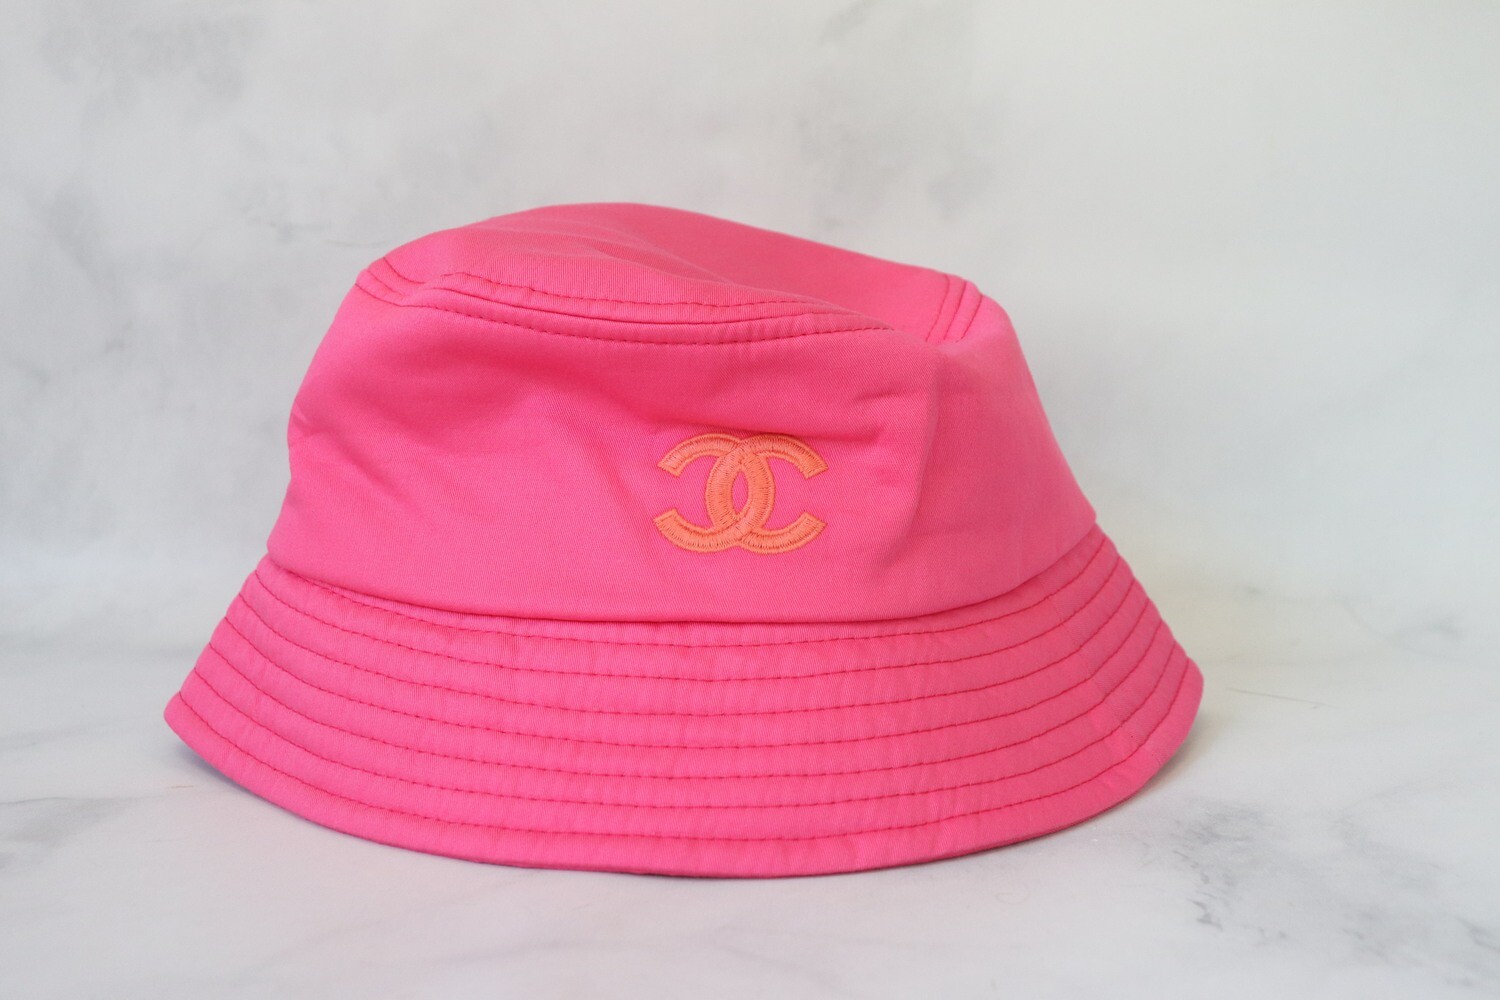 Chanel Hat Pink Bucket, Size Small, New in Dustbag